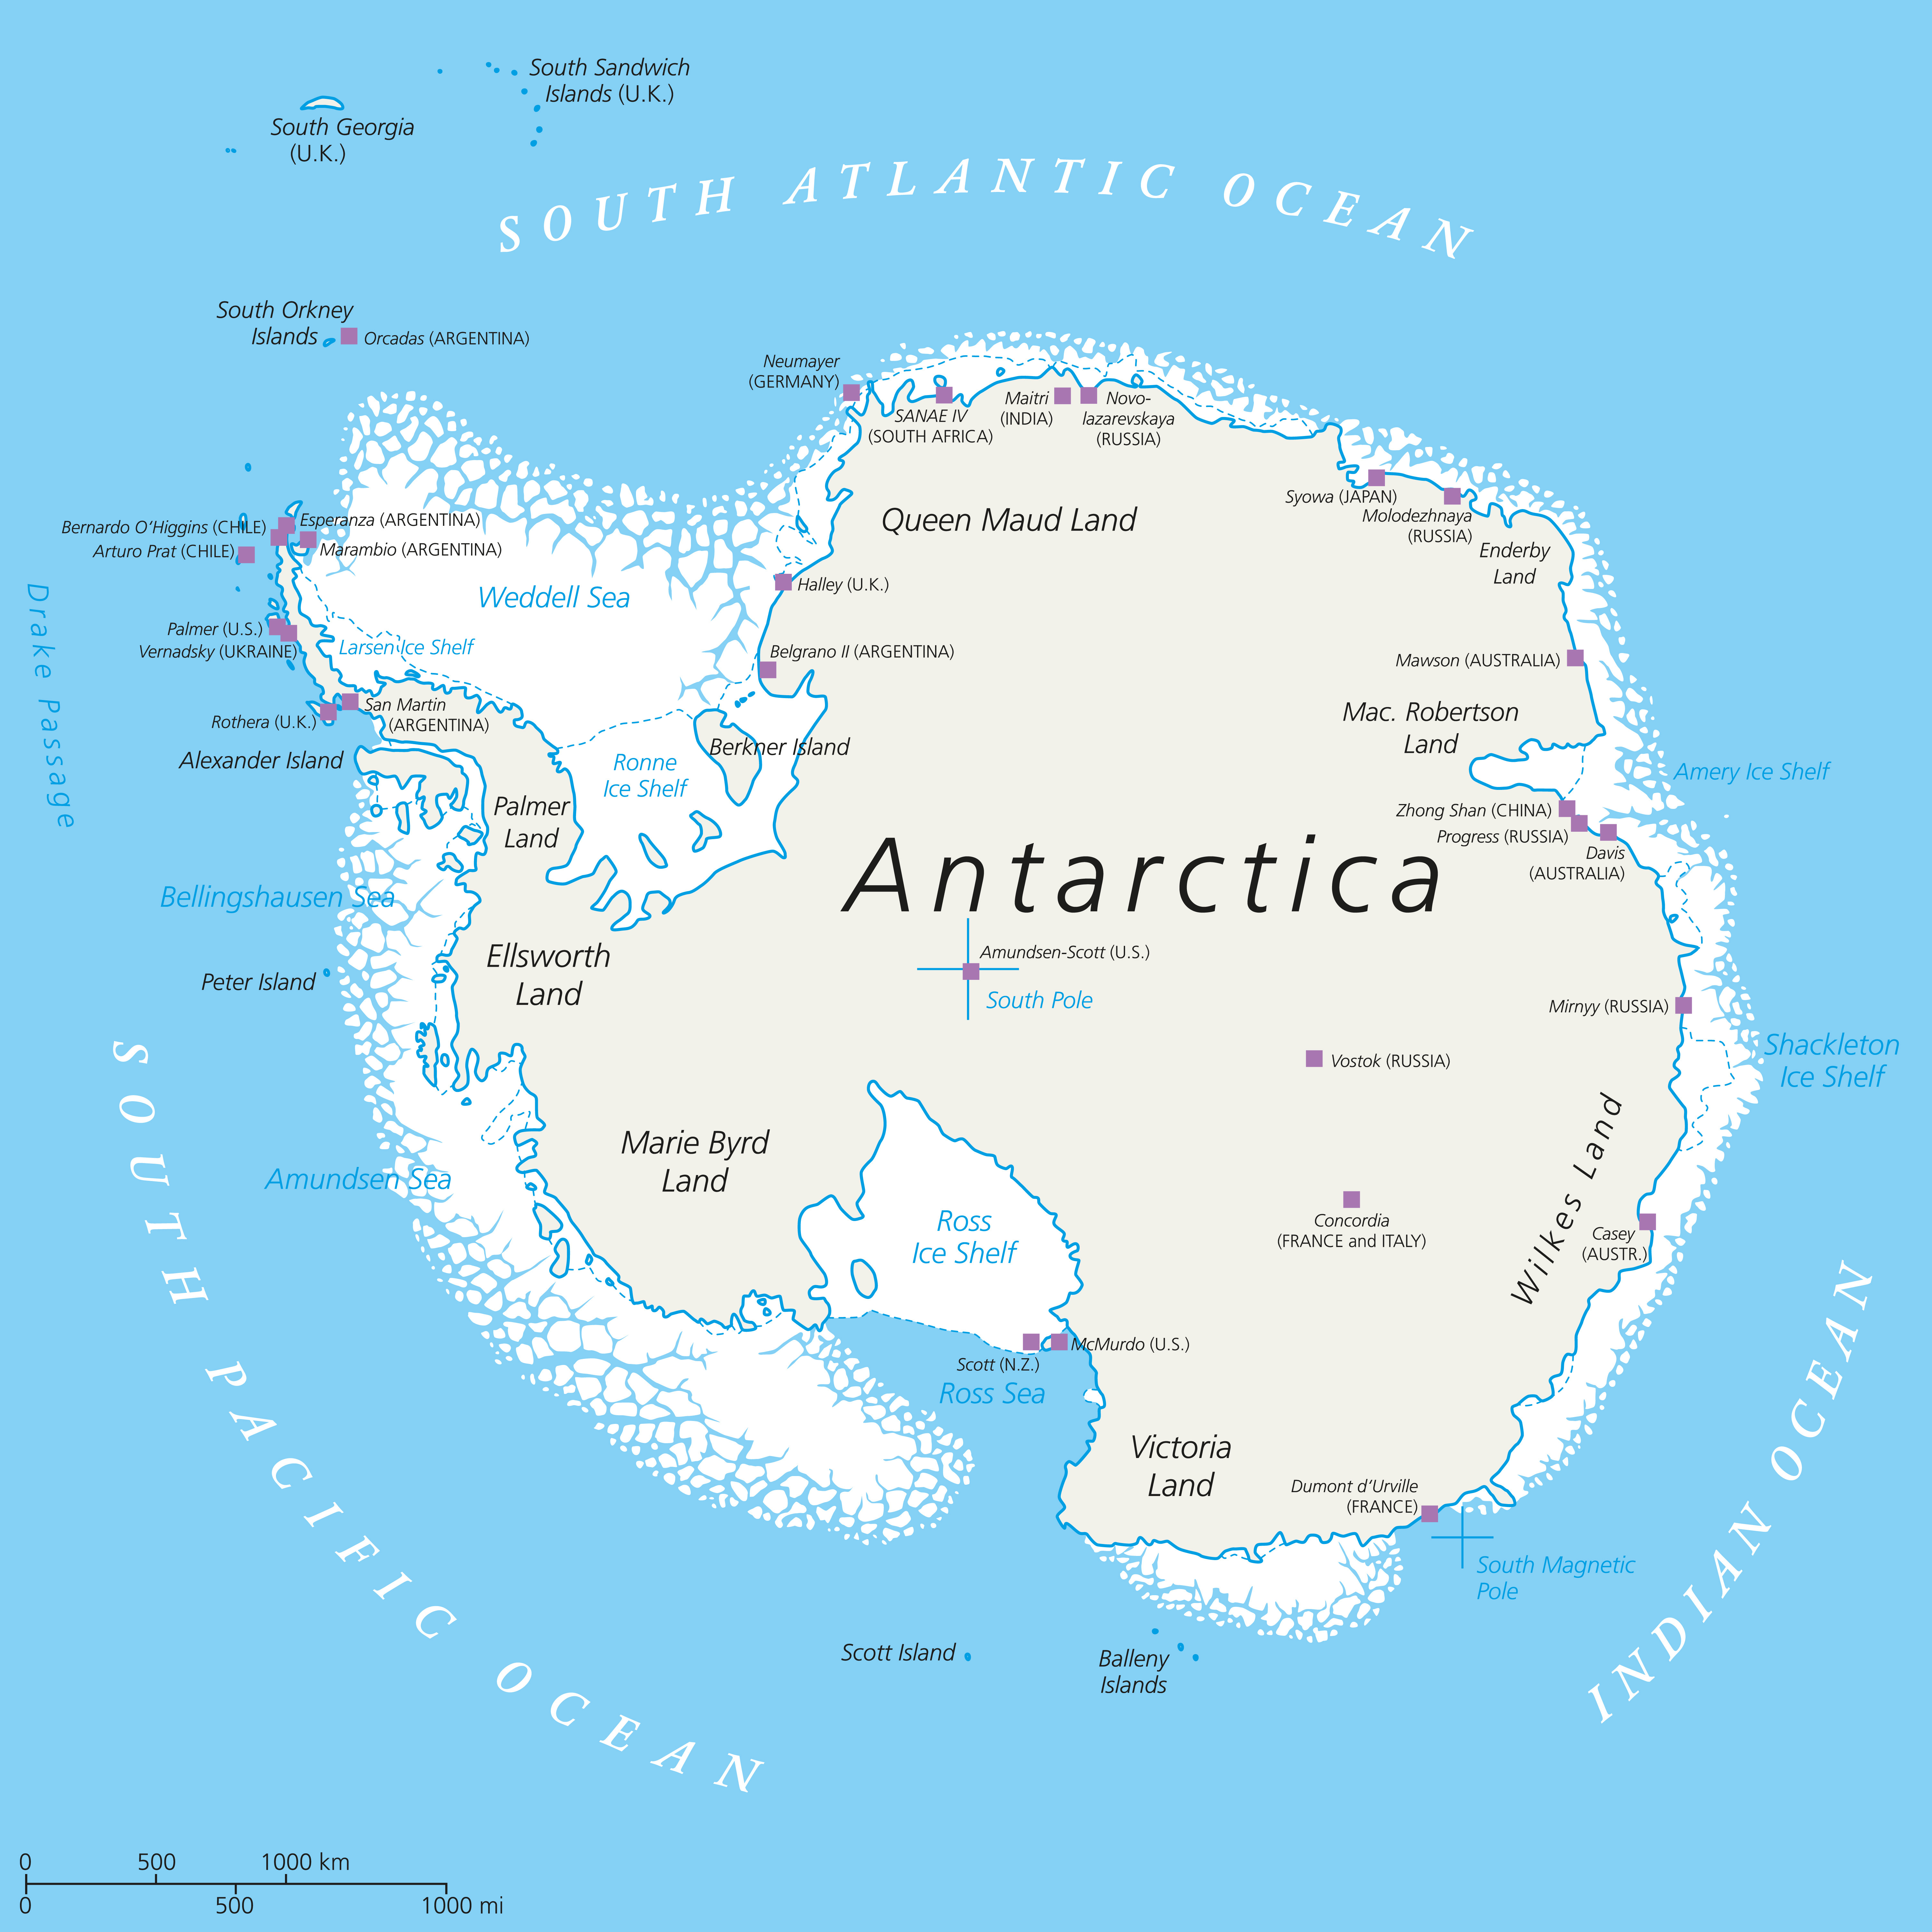 Geography Antarctica 2 Level 1 Activity For Kids PrimaryLeap co uk